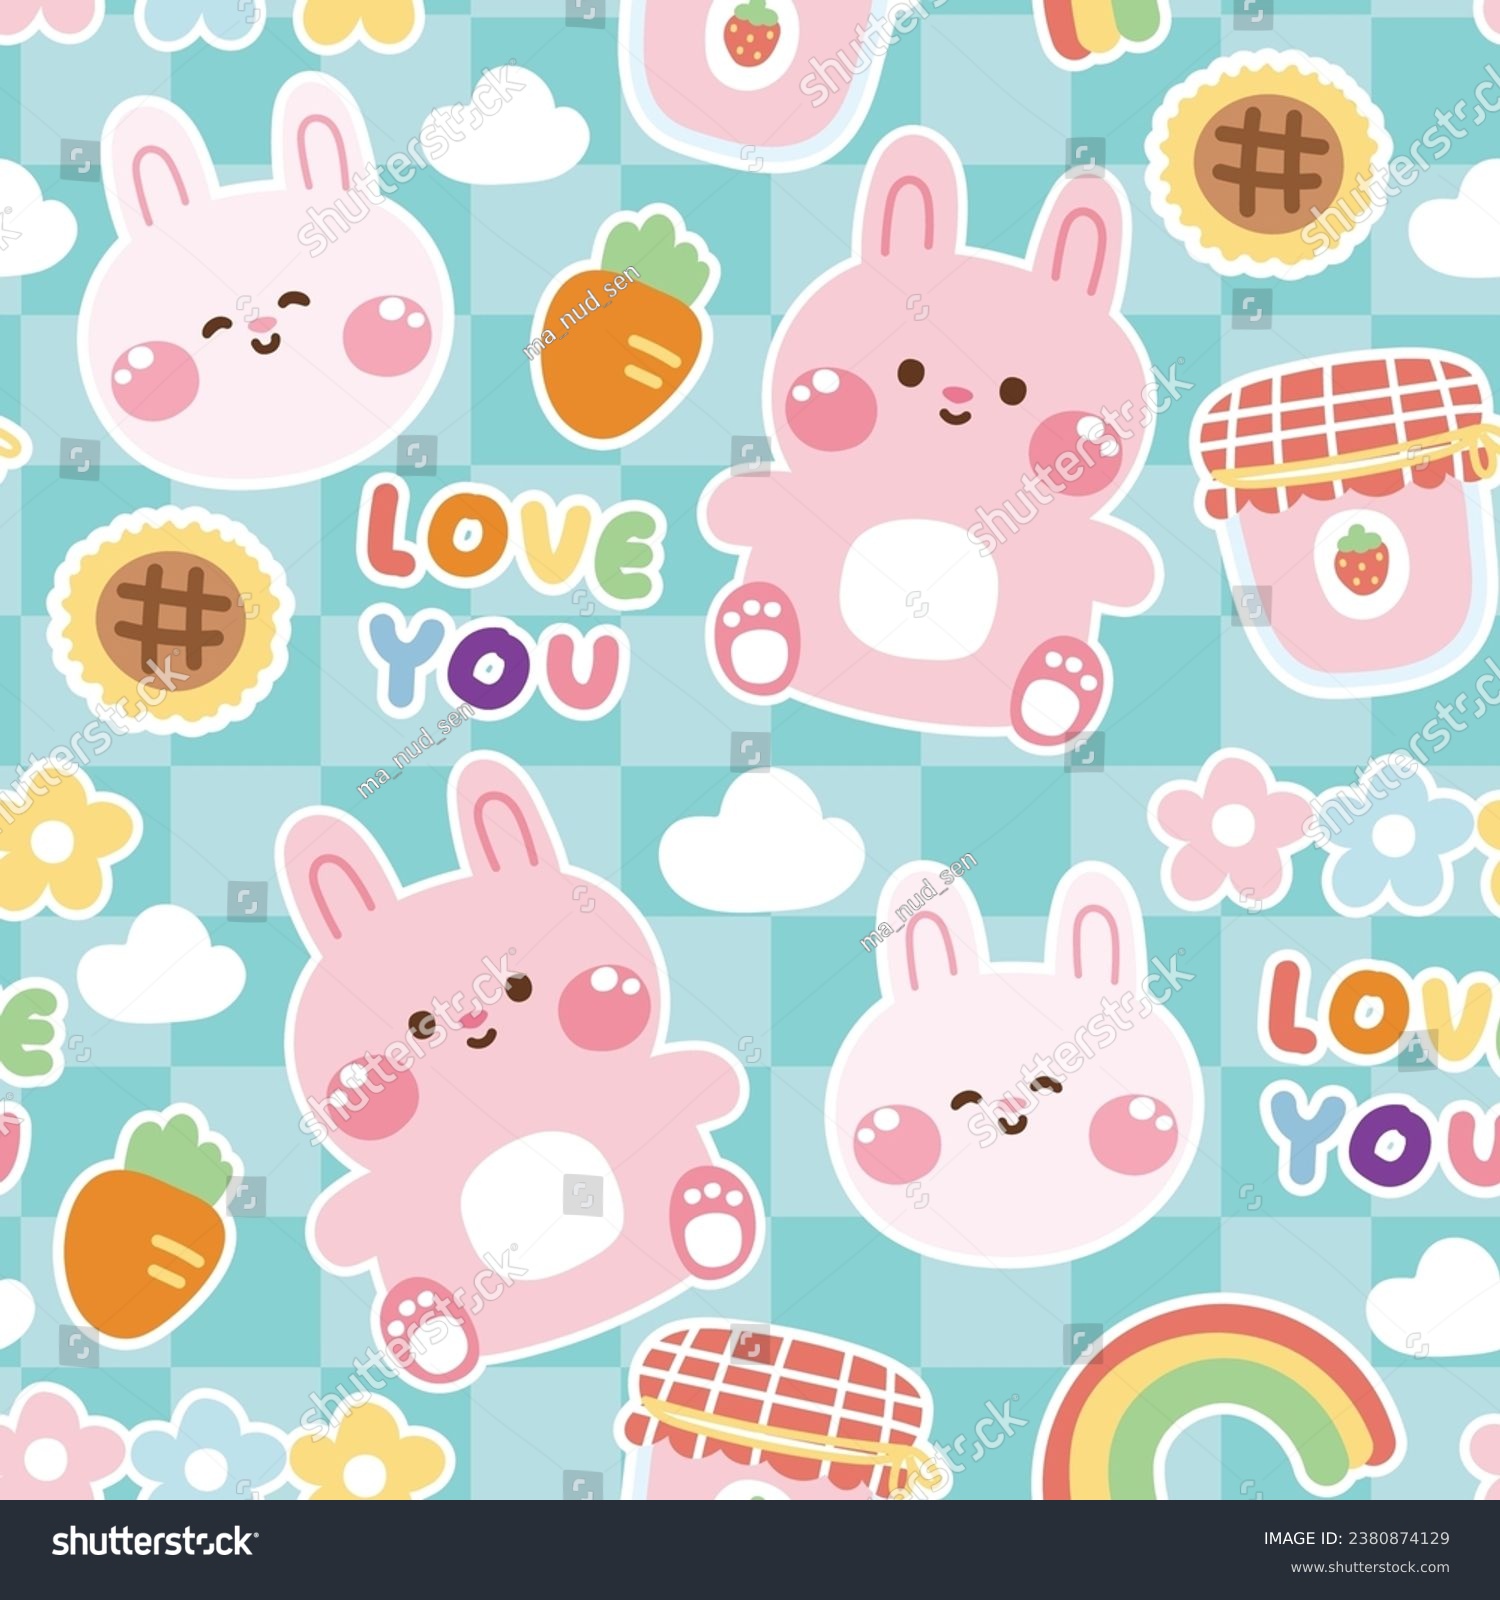 SVG of Seamles pattern of cute rabbit with various icon on blue background.Rodent animal character cartoon design.Rainbow,carrot,strawberry jam,sunflower,cloud hand drawn.Kawaii.Vector.Illustration. svg